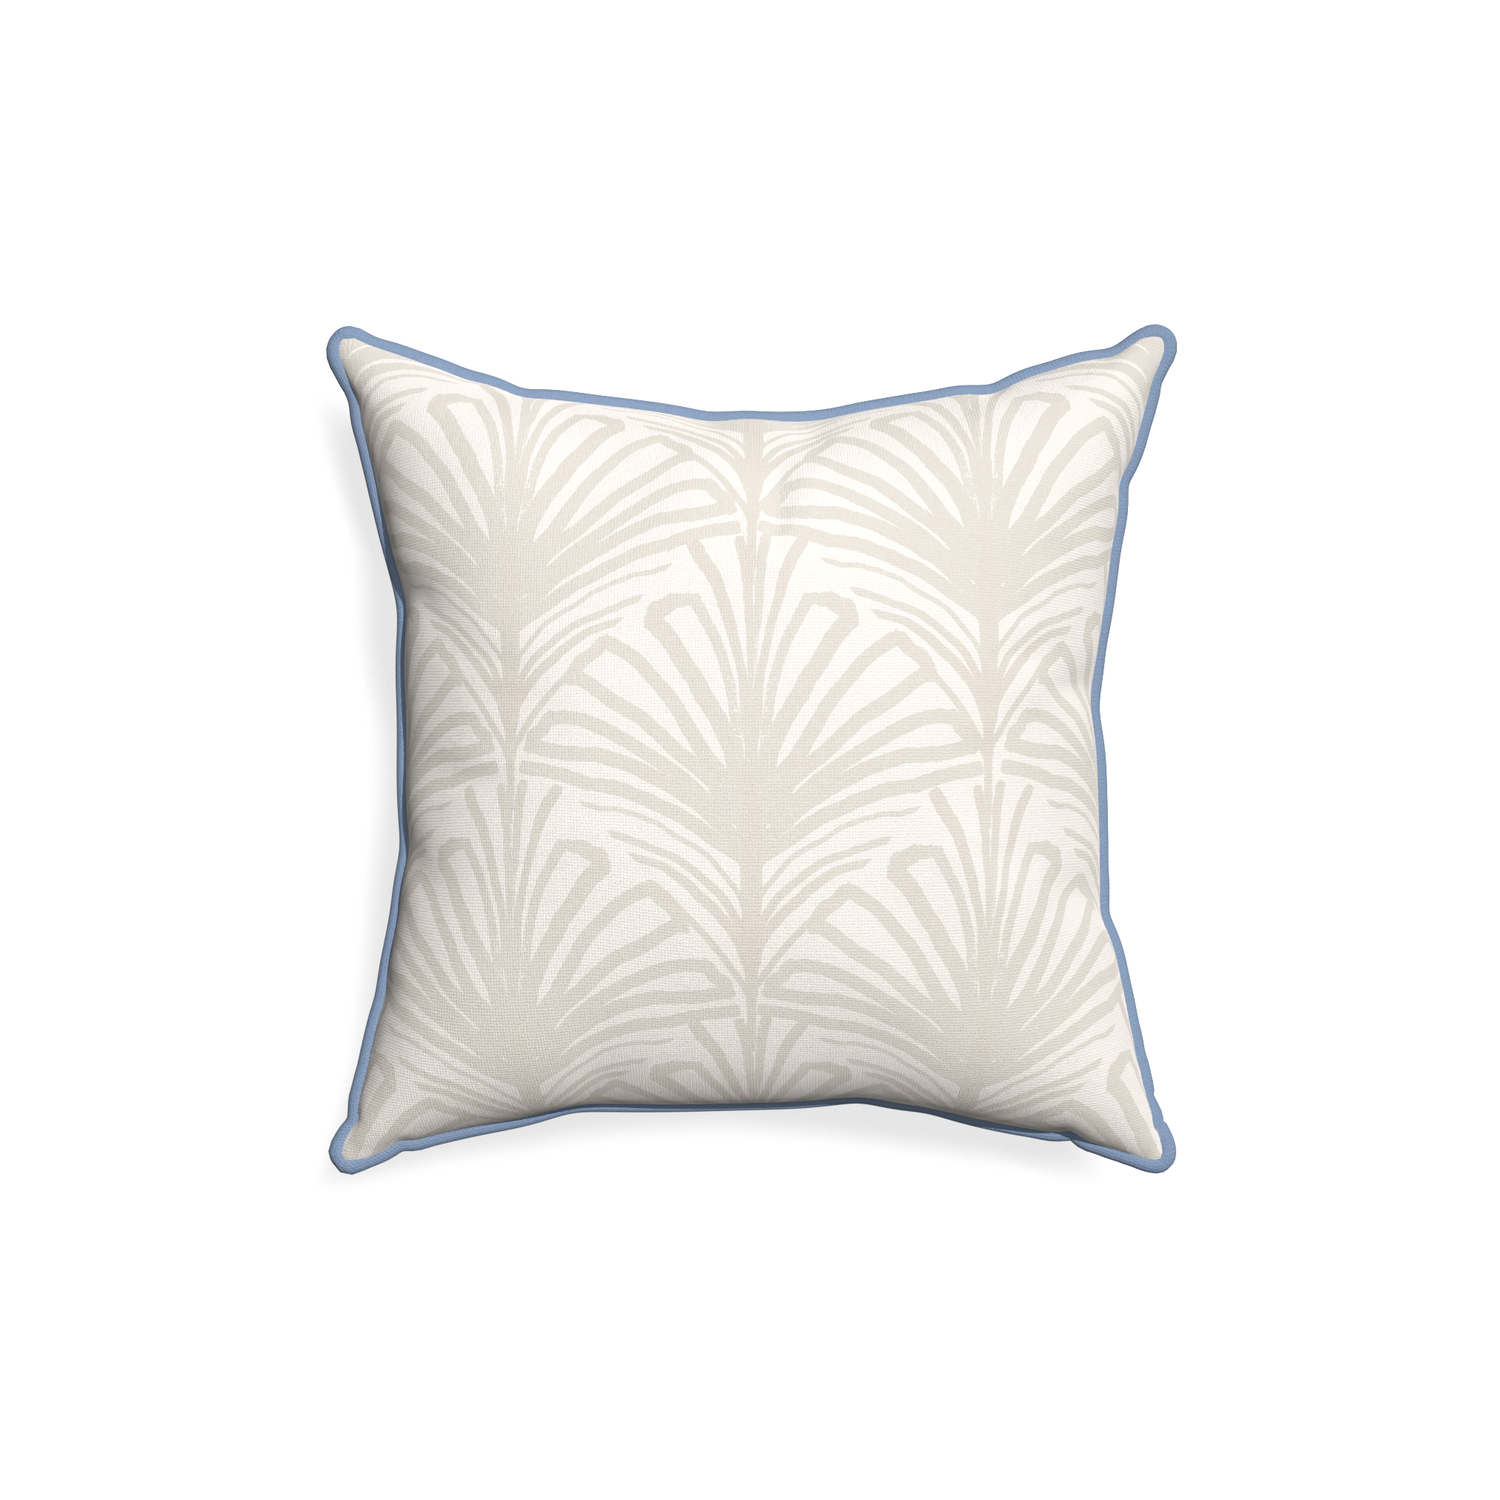 18-square suzy sand custom pillow with sky piping on white background